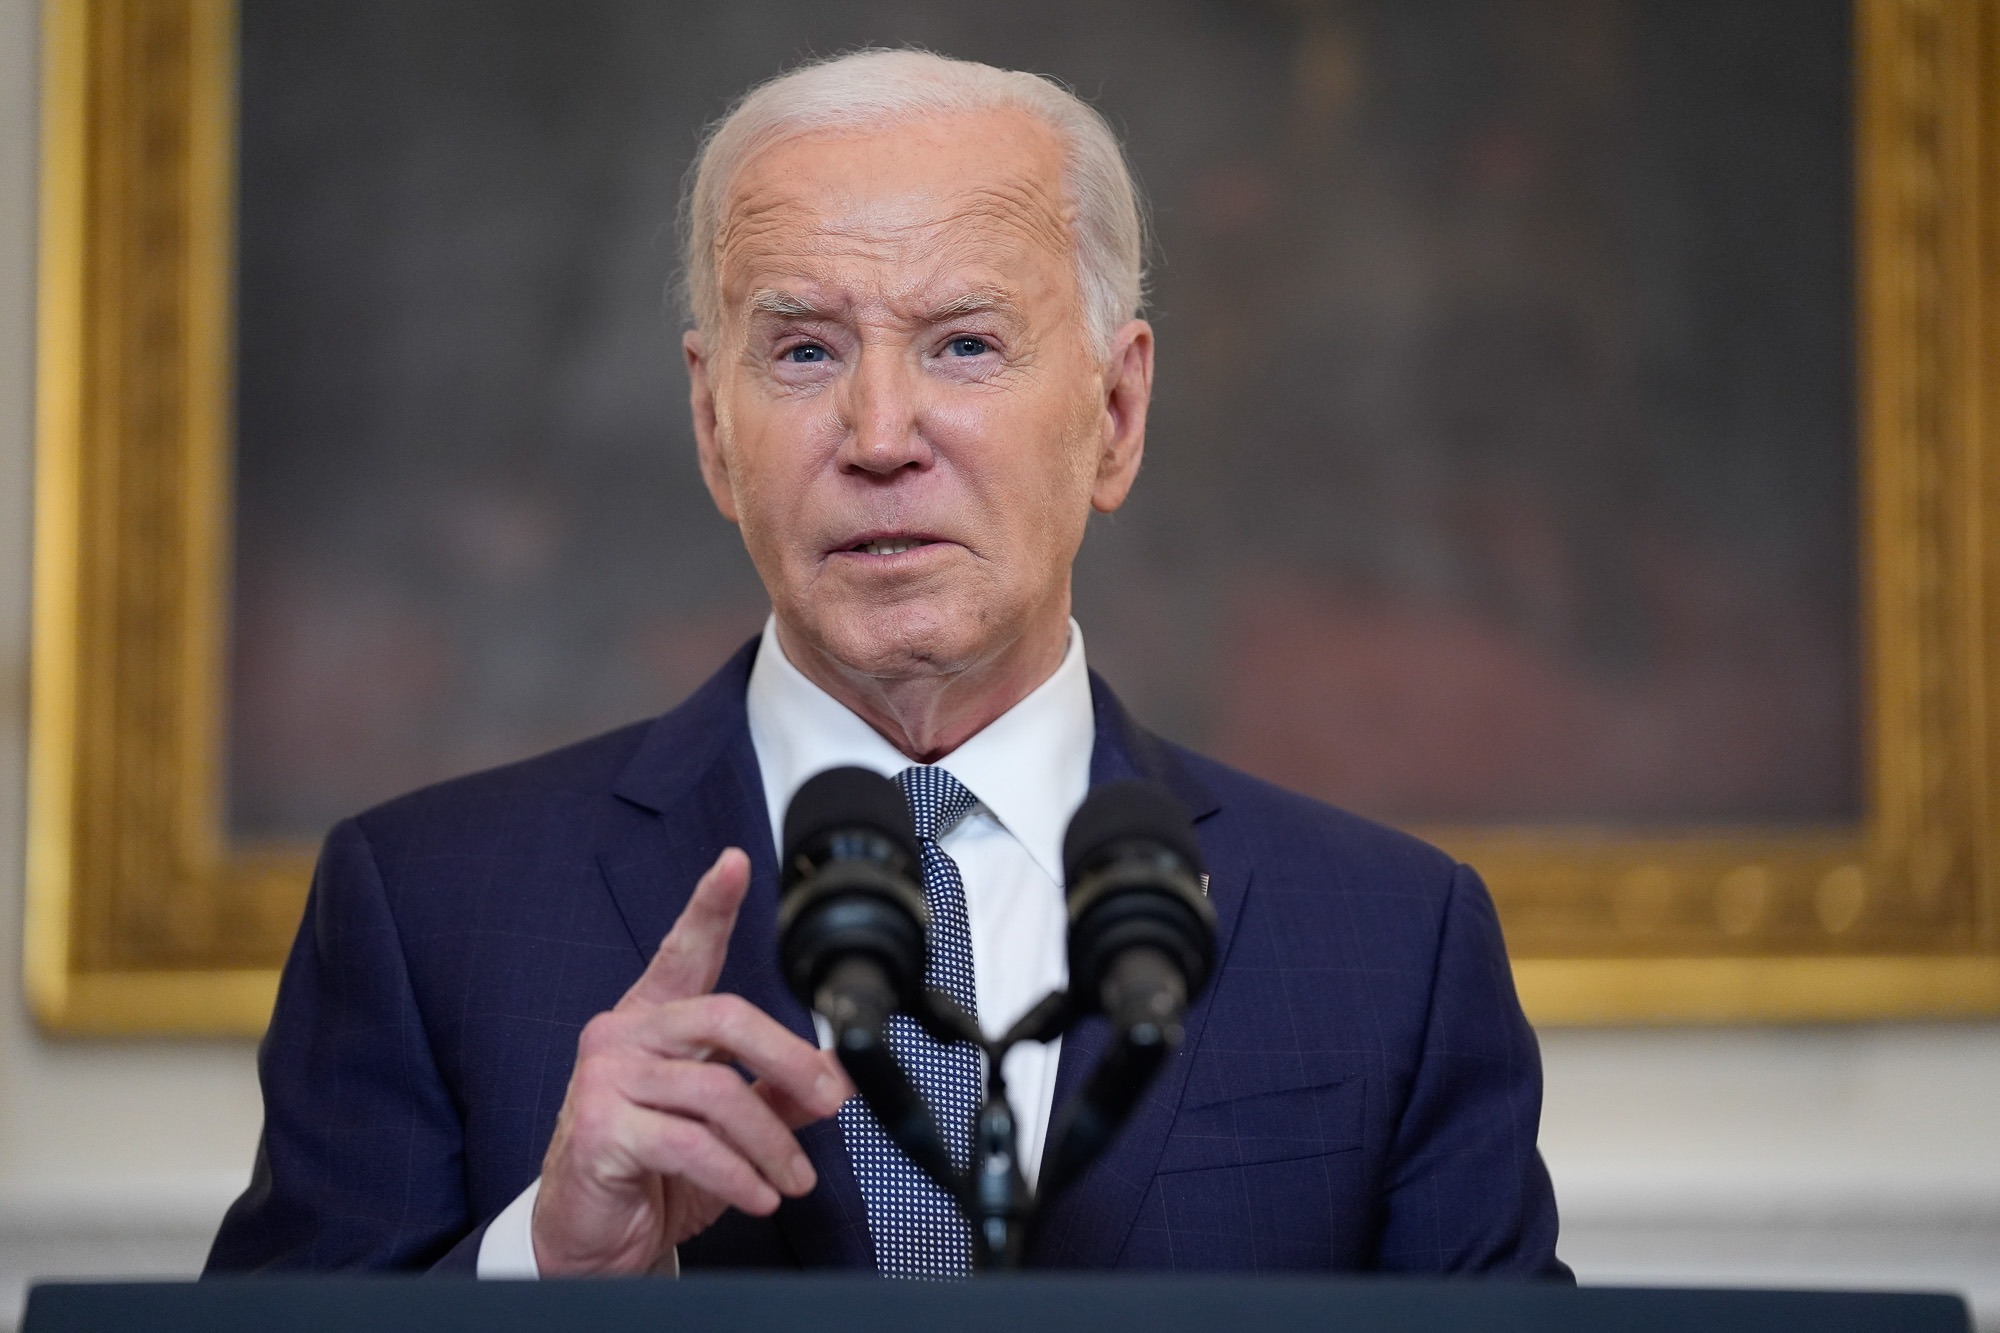 President Biden Responds to Trump’s Assertion That the Justice System Is Rigged